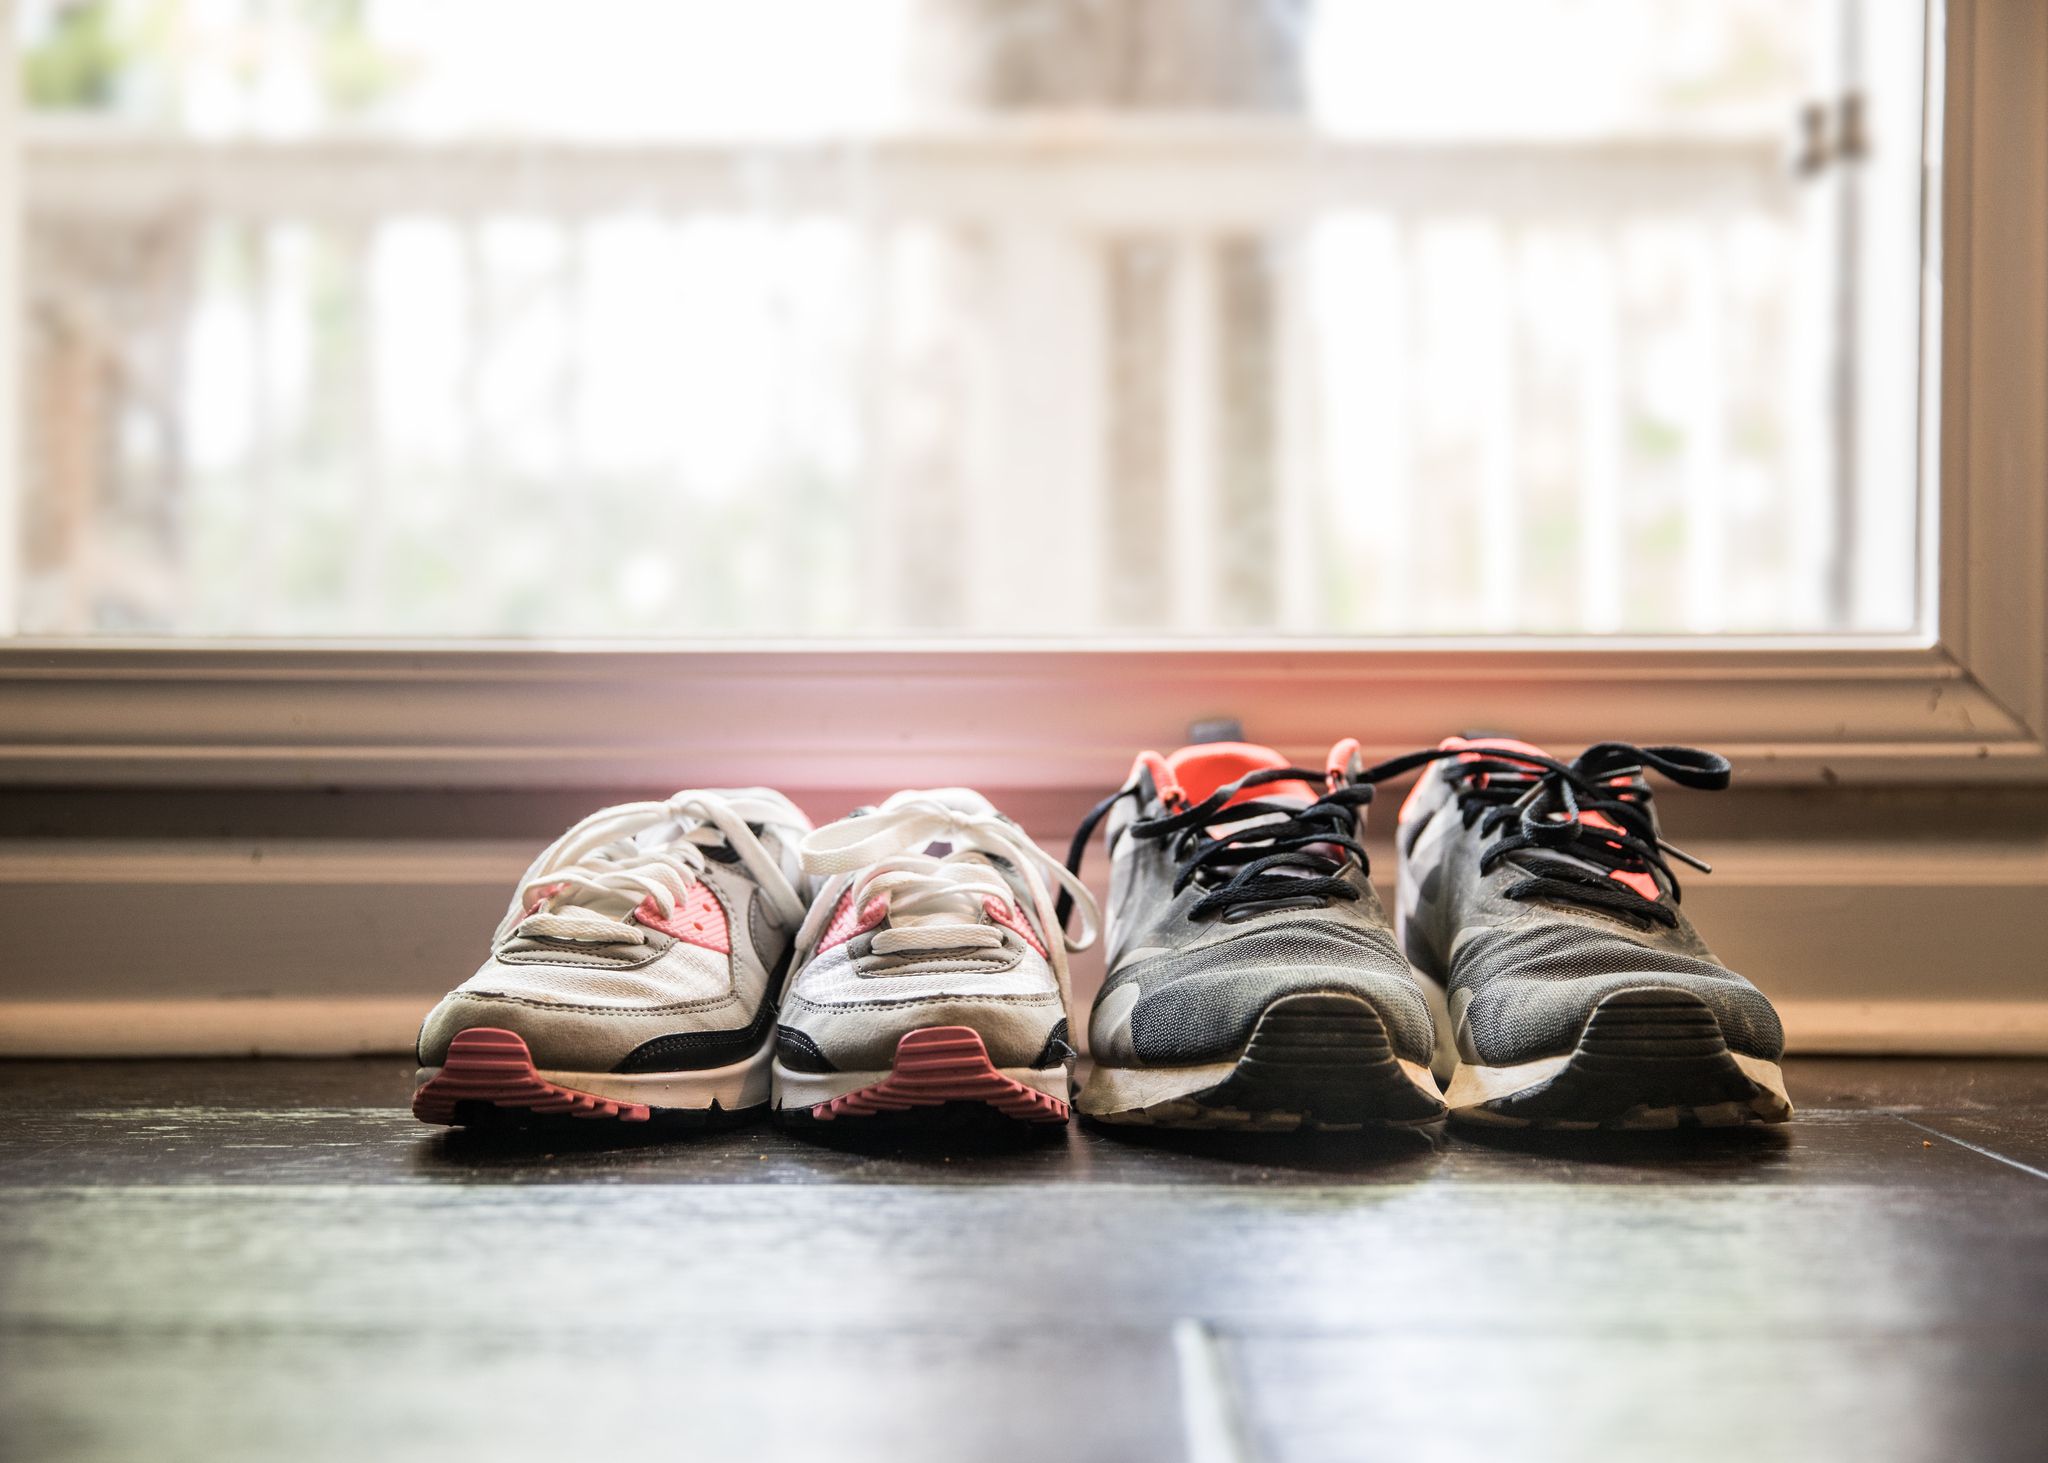 How a comfortable pair of shoes can improve running efficiency